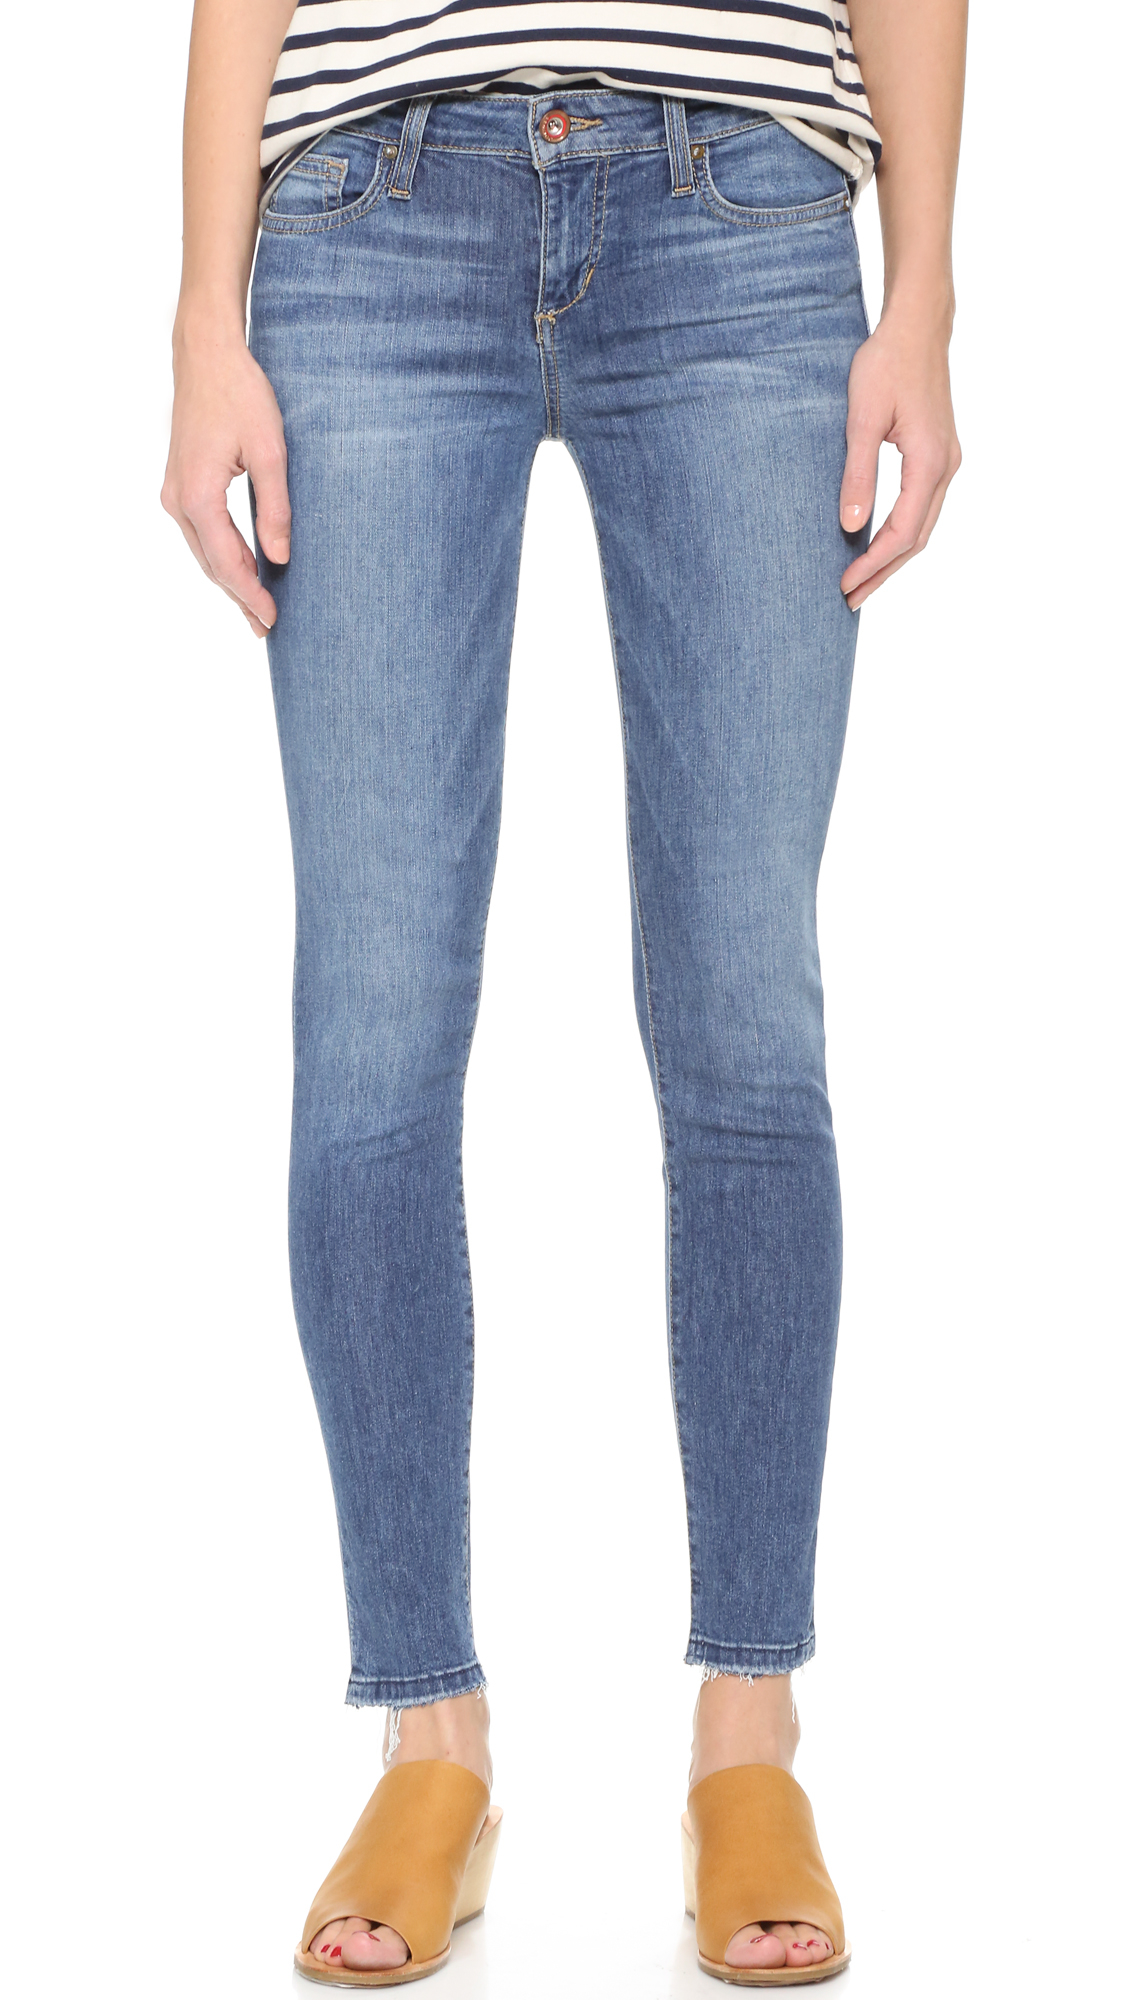 Joe's Jeans Denim The Icon Mid Rise Skinny Ankle Jeans in Blue - Lyst